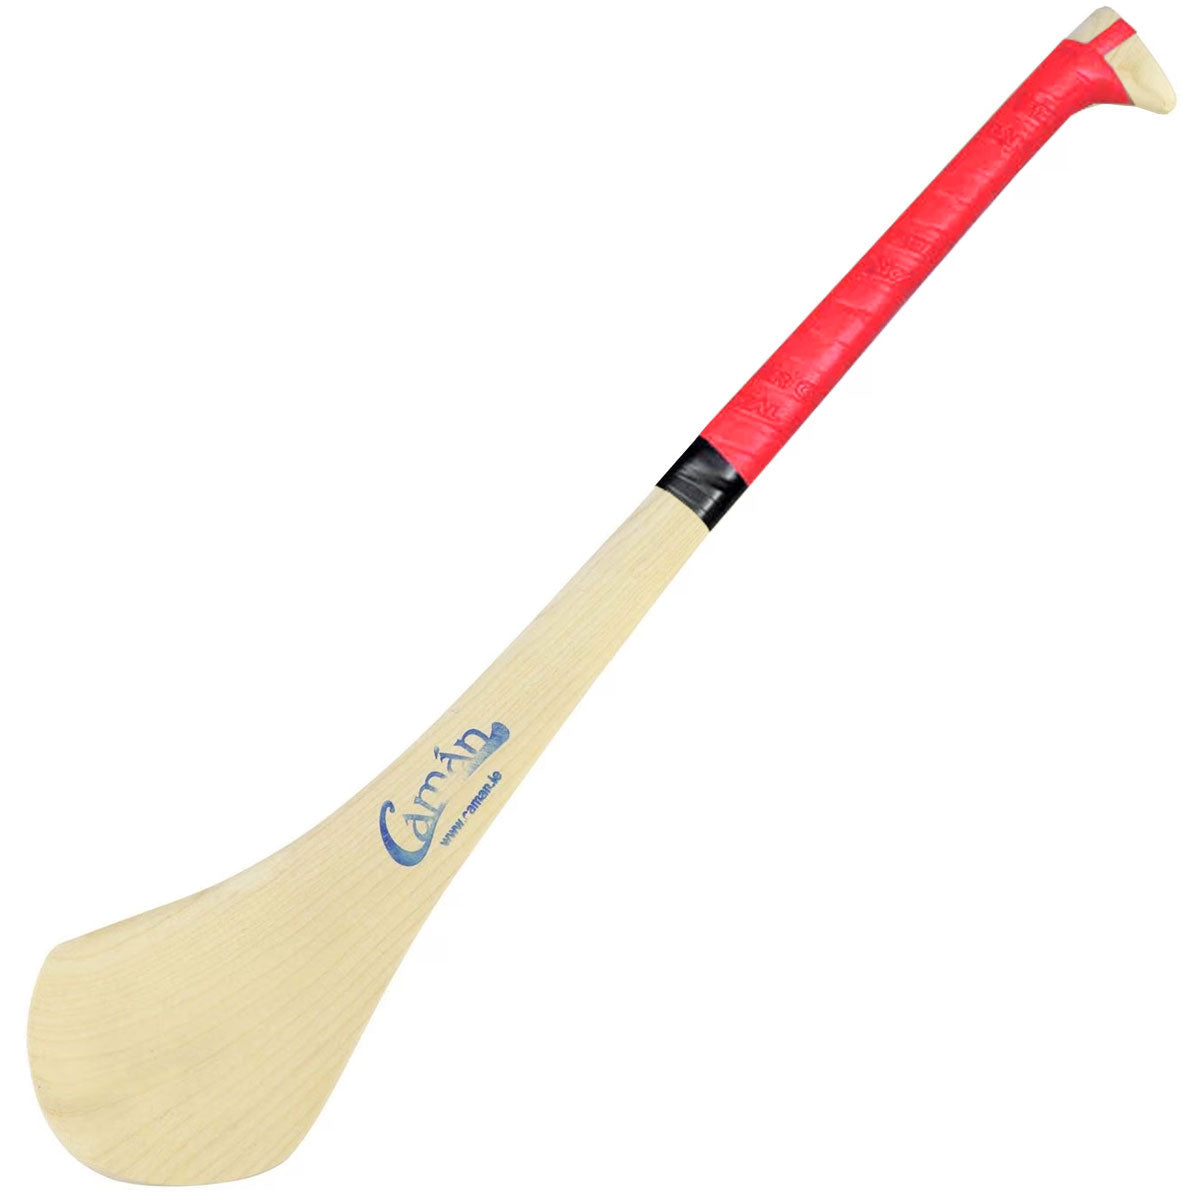 Caman Hurling Stick size 24 (Inches)